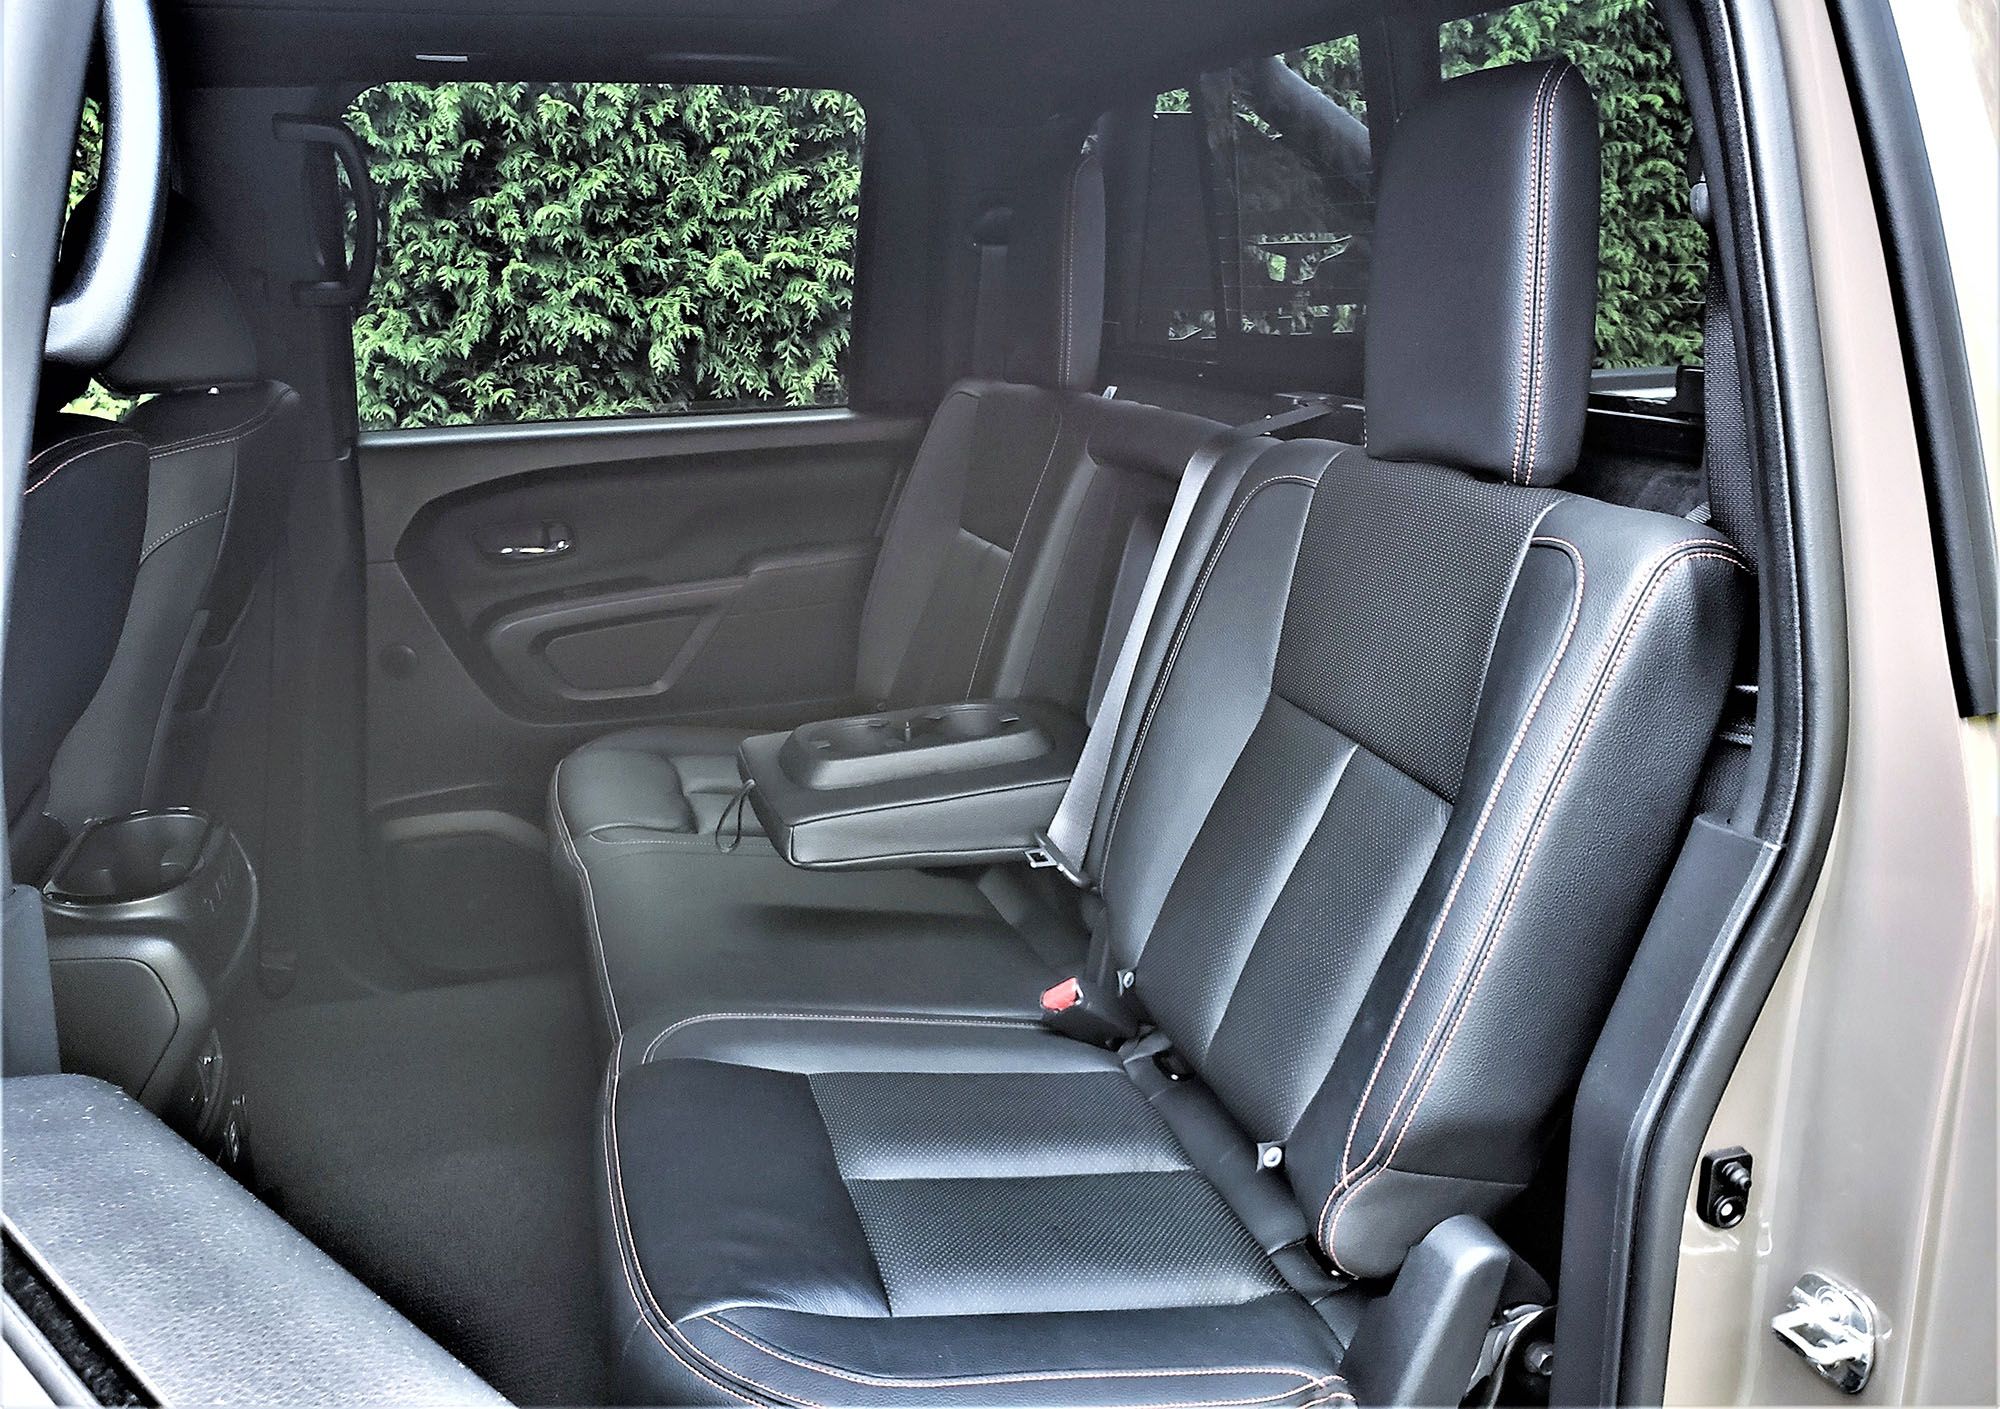 2022 Nissan Titan Crew Cab PRO 4X Luxury model's rear seat is roomy and comfortable.